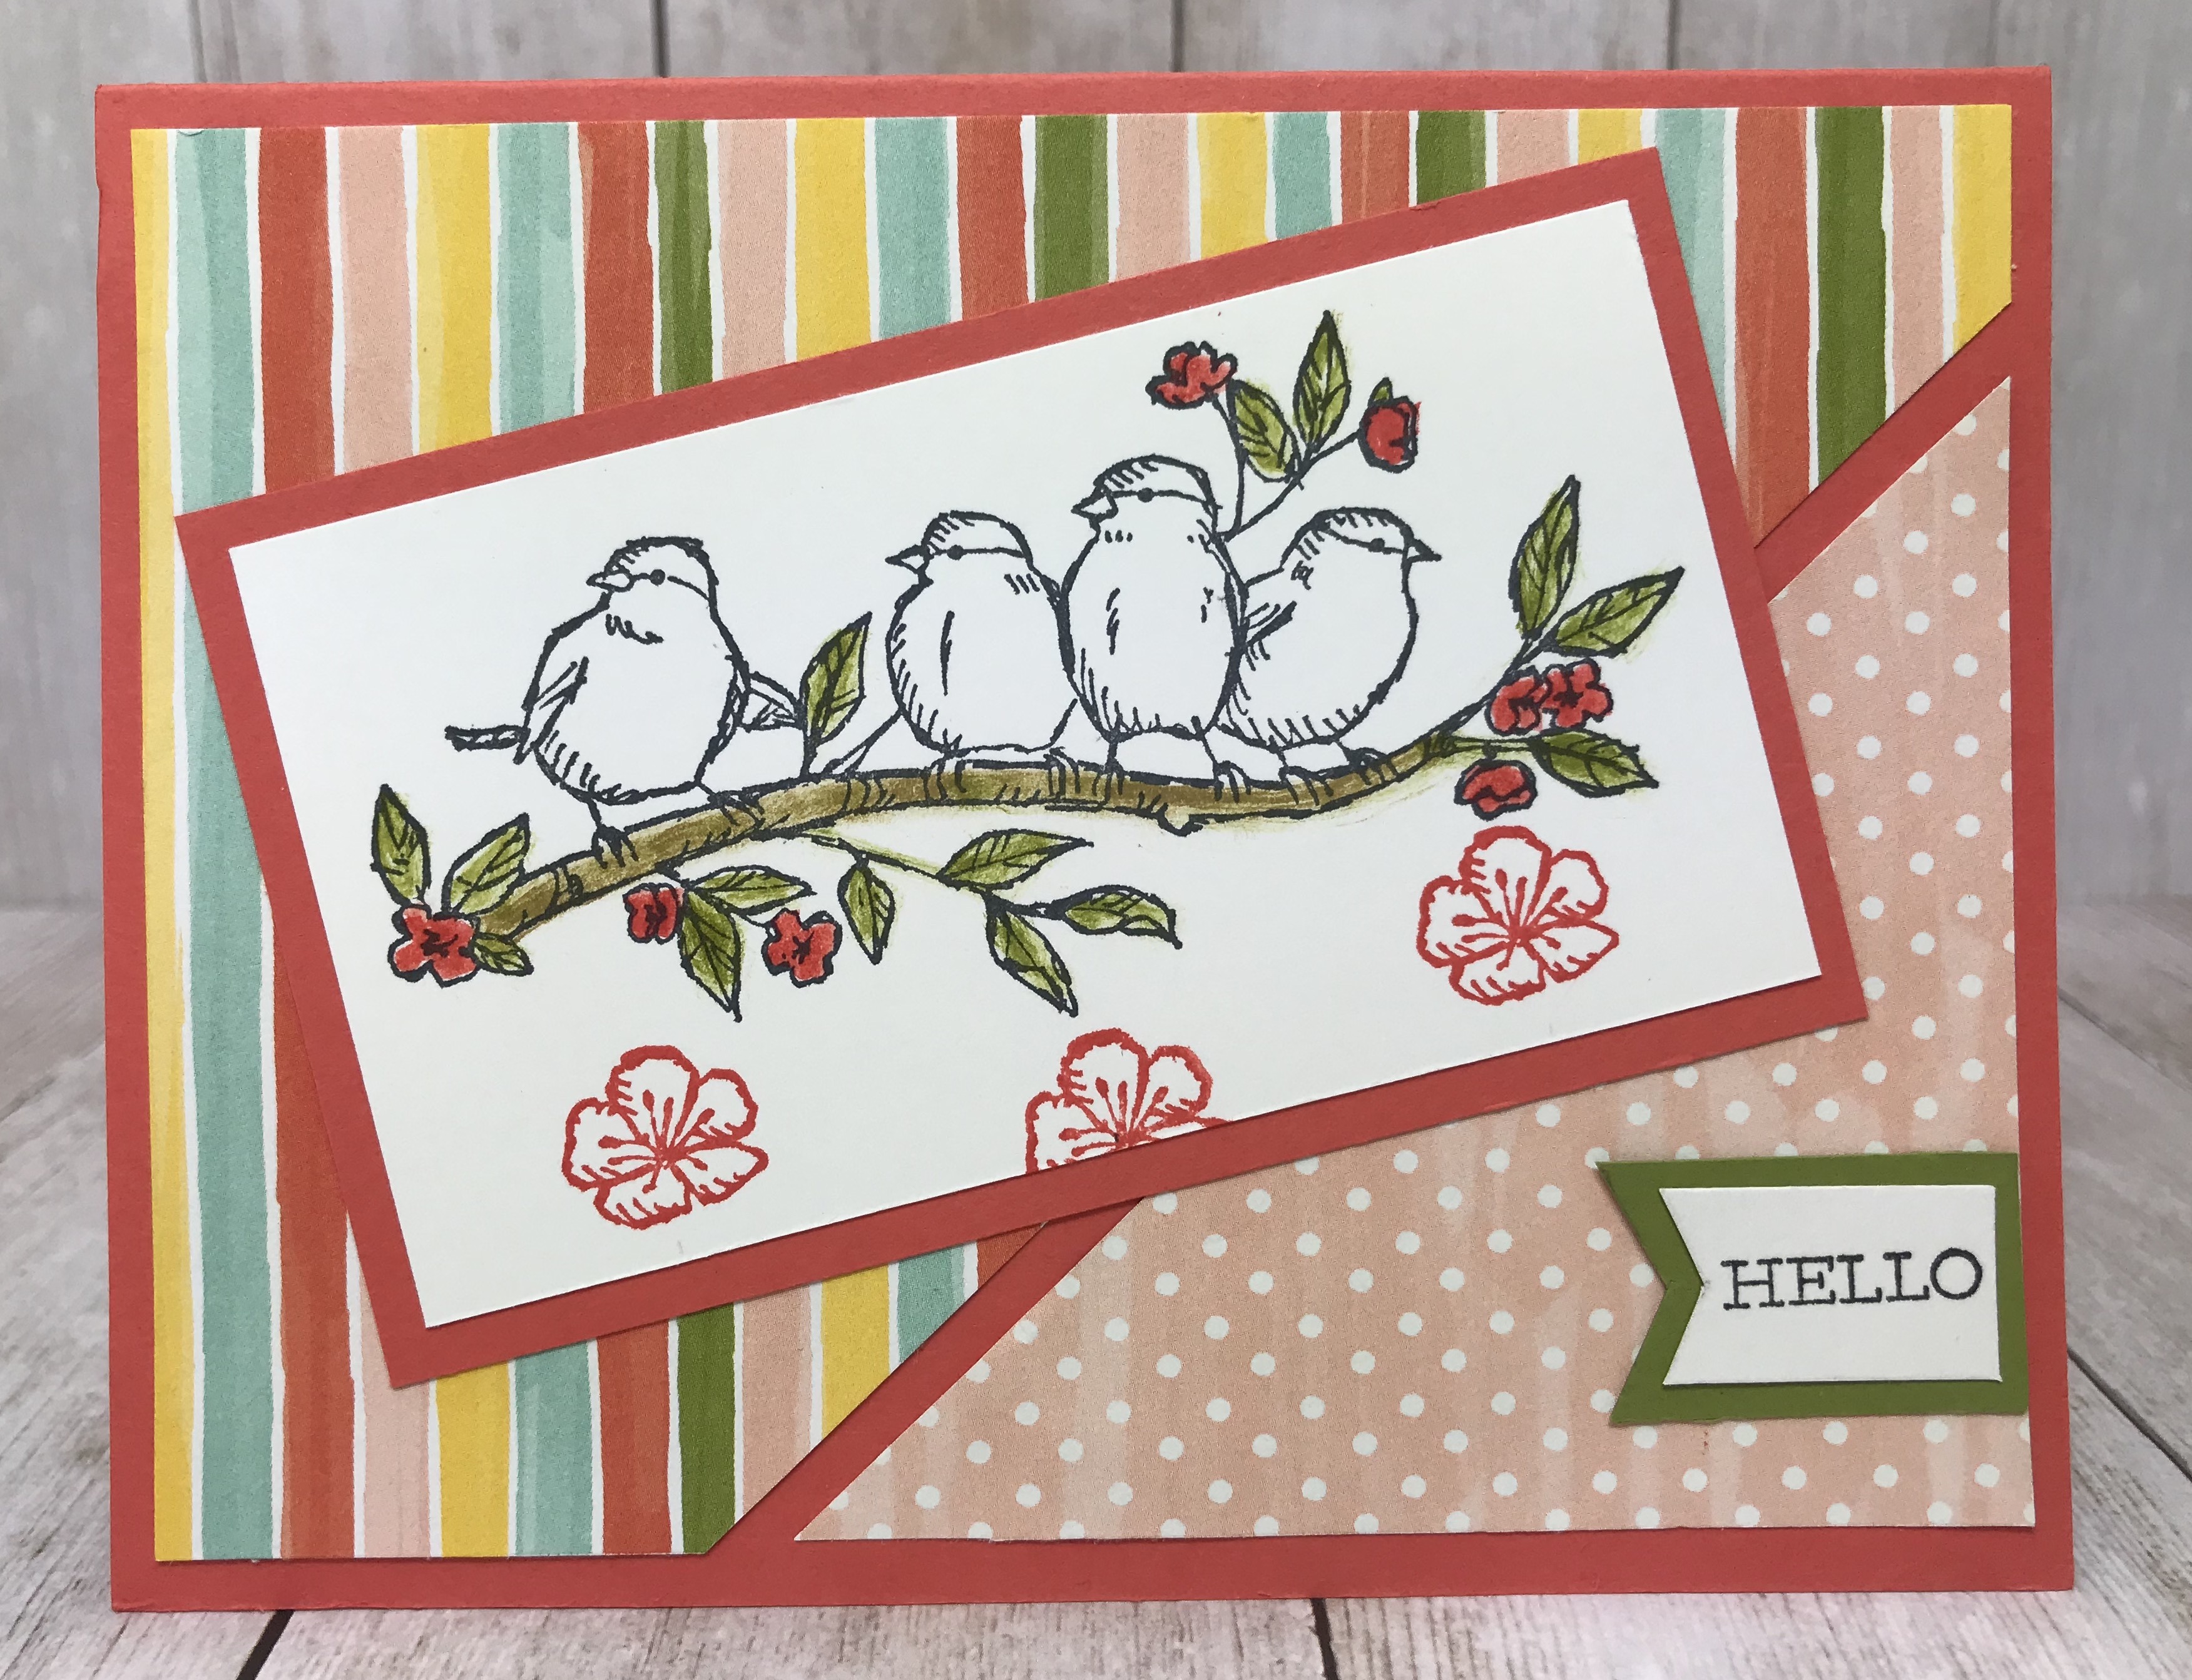 This is a team stamp camp card done by Pat Miedema. My challenge for April was Simple Stamping. Details are on my blog here: https://wp.me/p59VWq-aYX #stampinup #thestampcamp #simplestamping